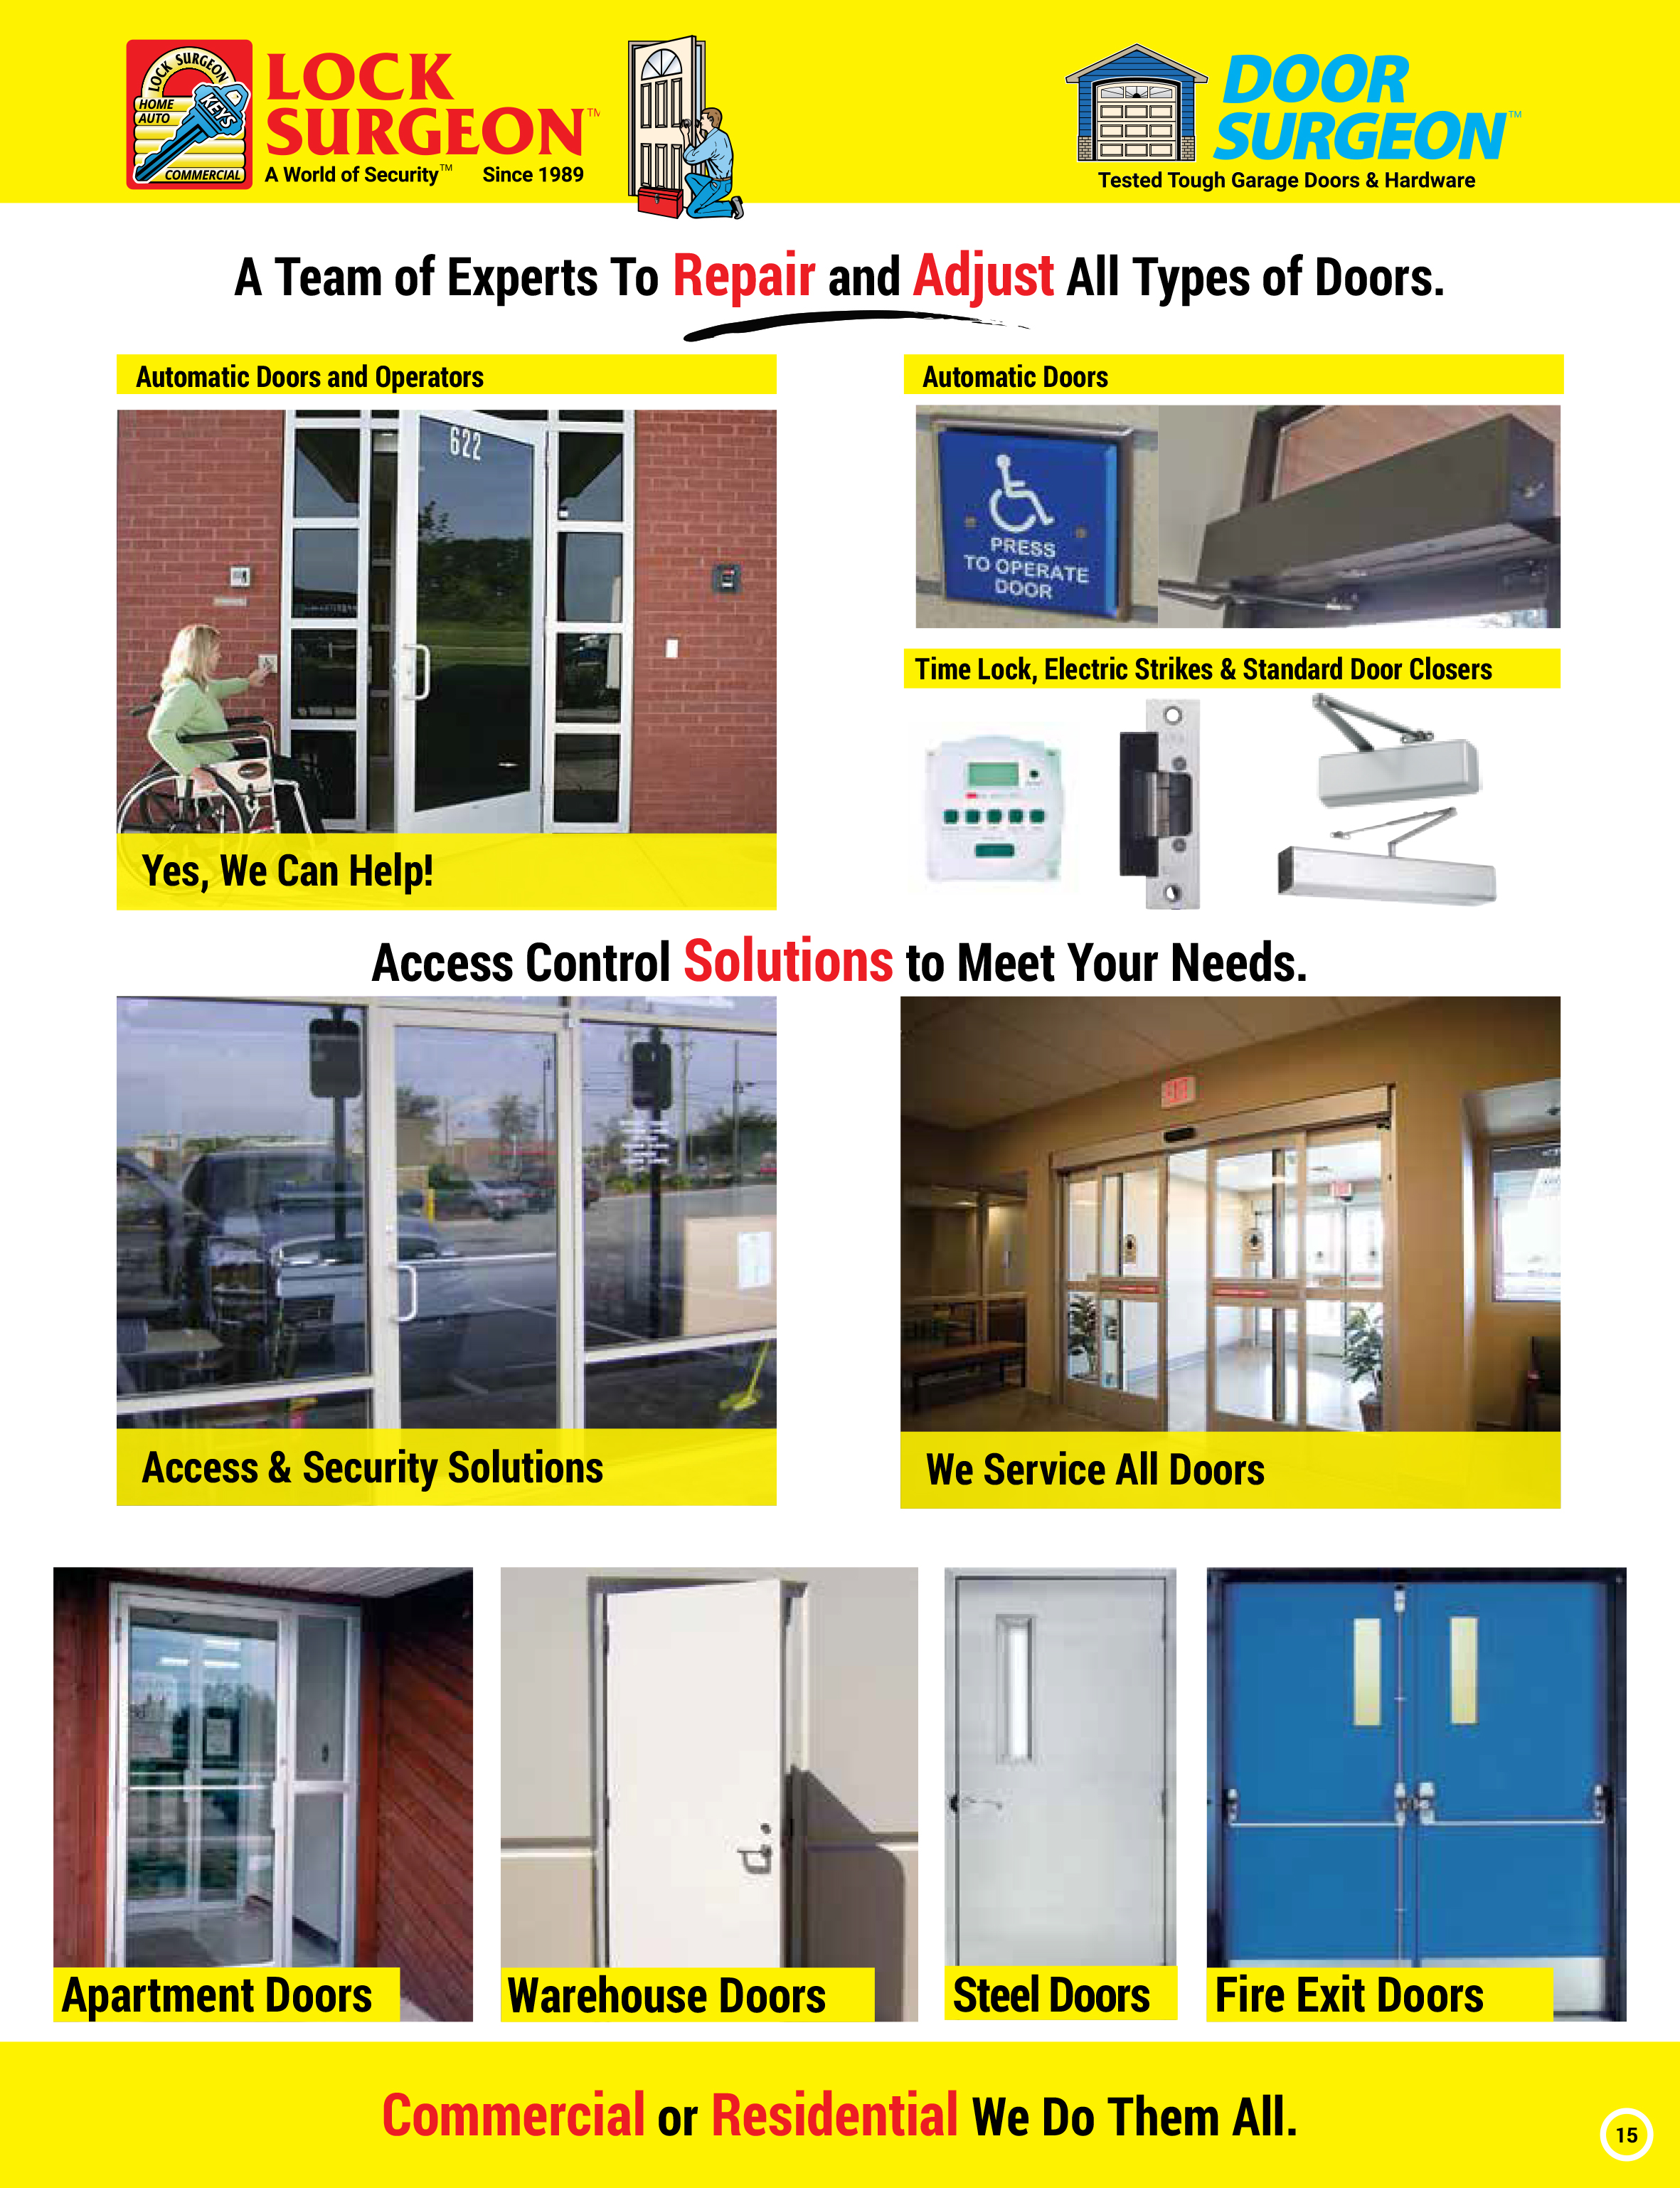 Door Surgeon provide access and security solutions for all residential & commercial doors.